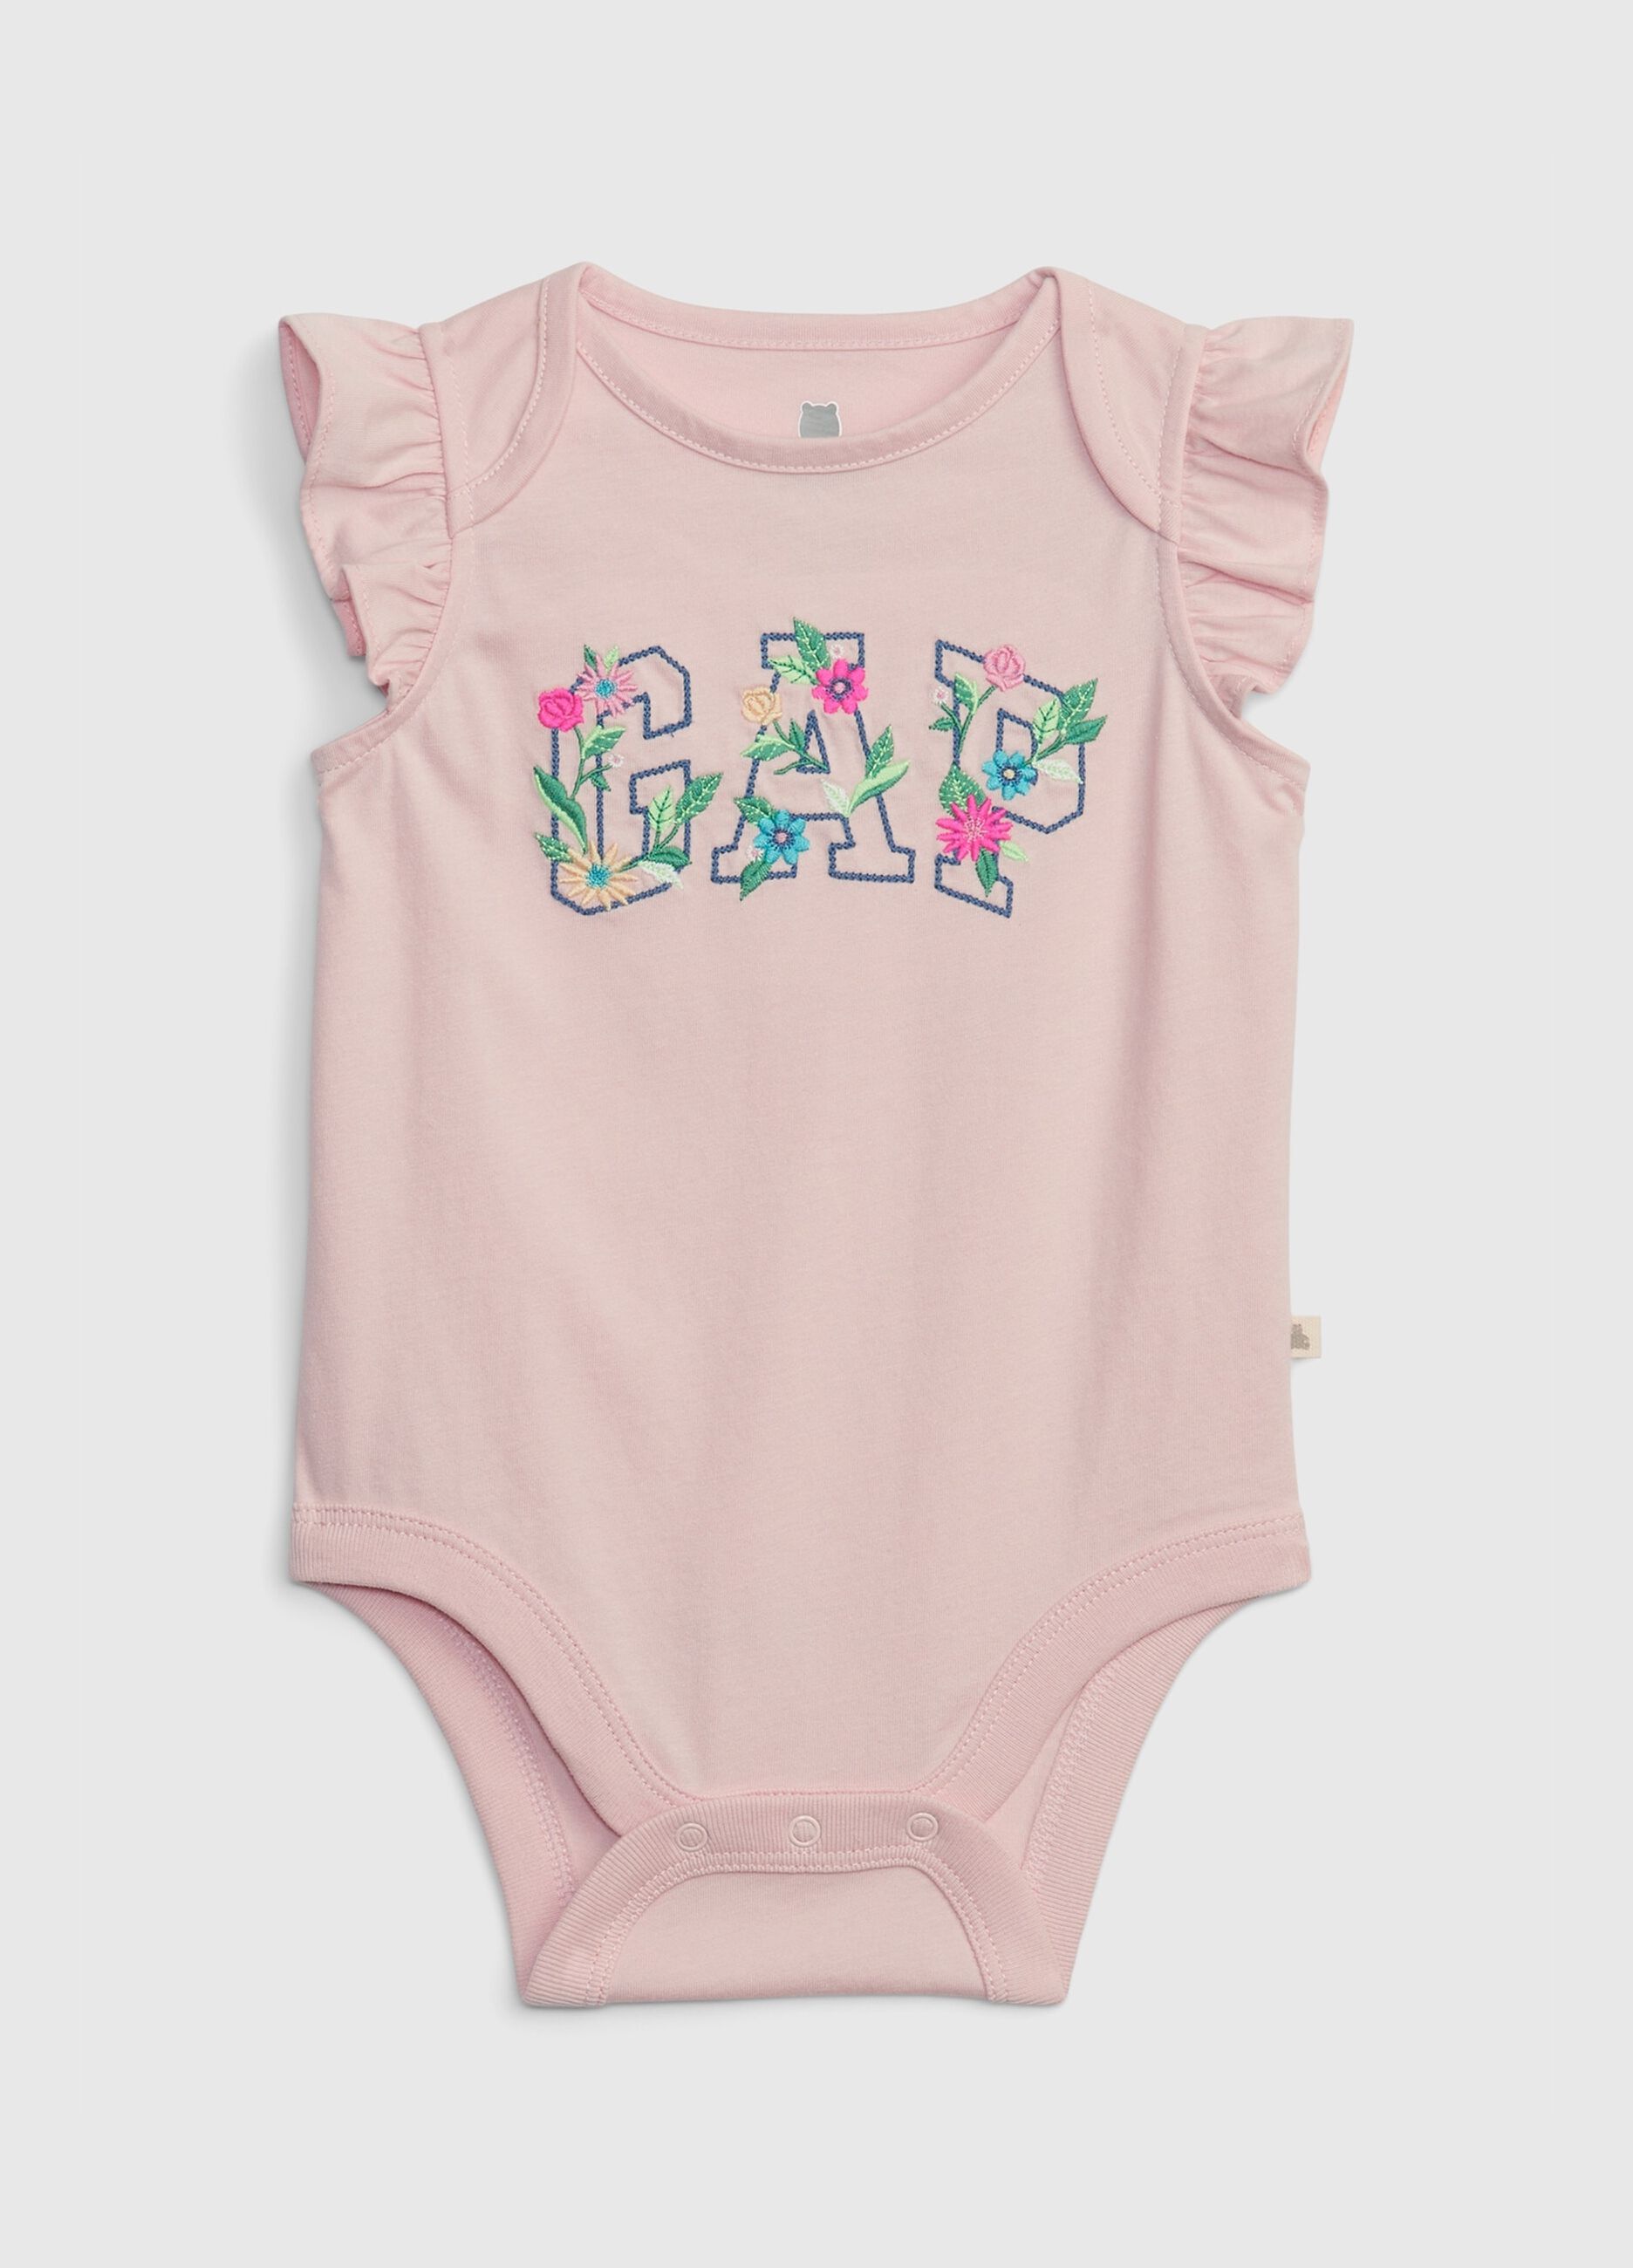 Sleeveless bodysuit with ruffles and embroidered logo